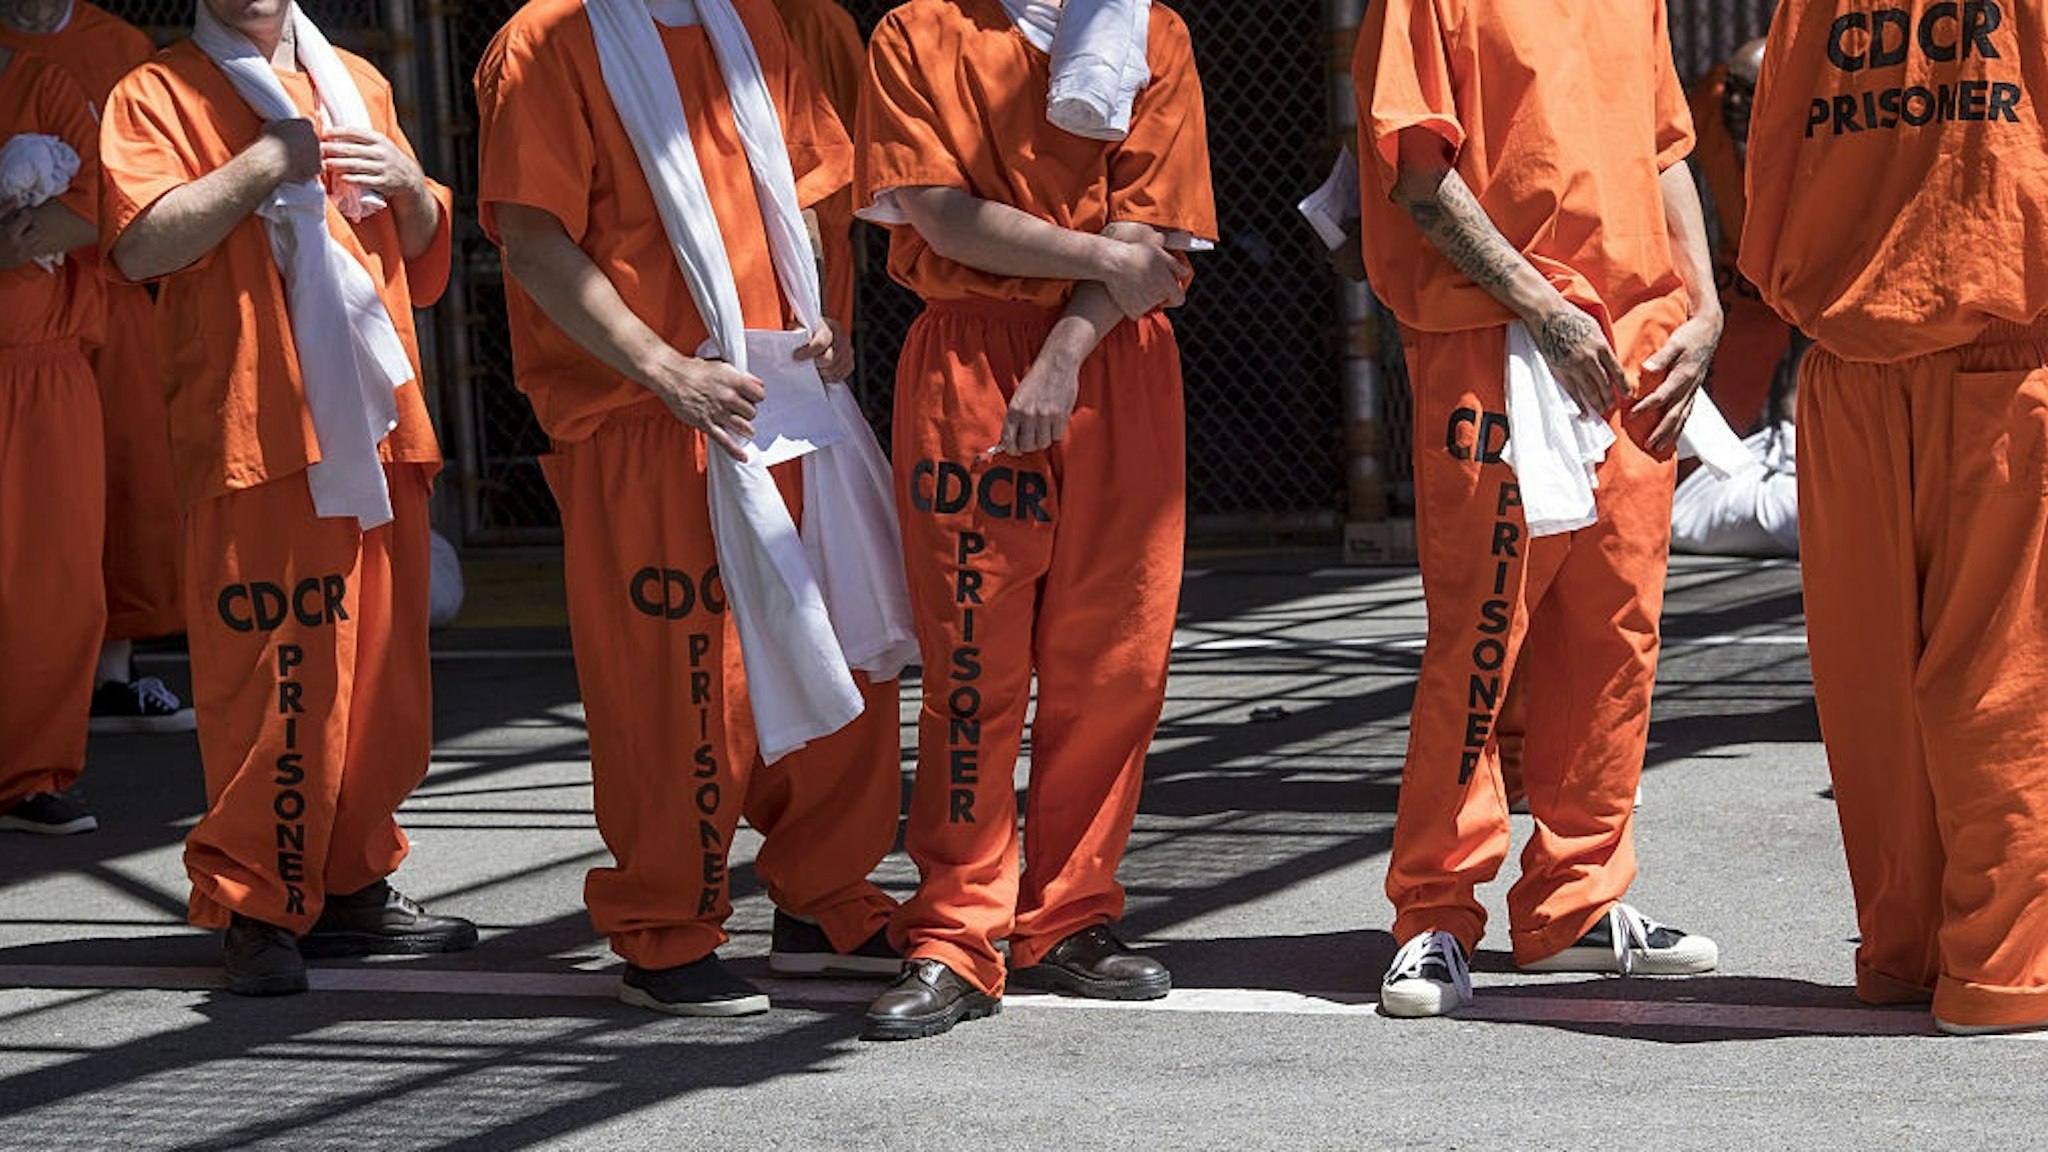 Inmates stand outside at San Quentin State Prison in San Quentin, California, U.S., on Tuesday, Aug. 16, 2016.